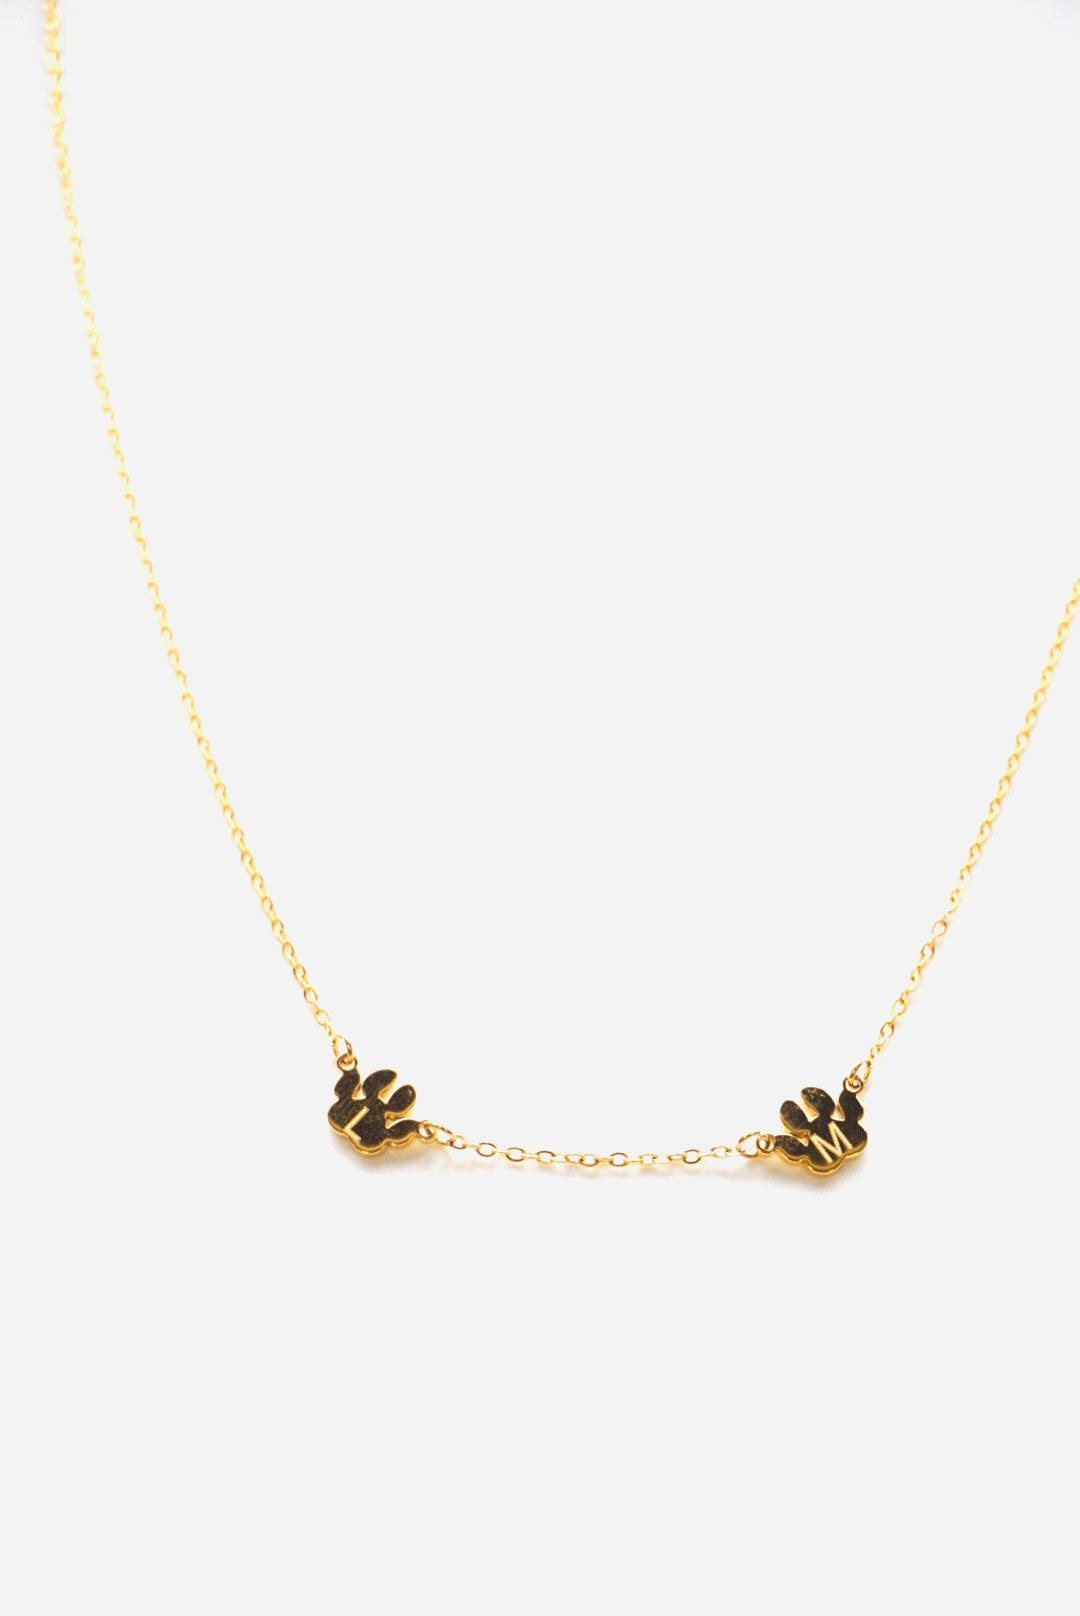 Engraved Abbie Paw Print Necklace